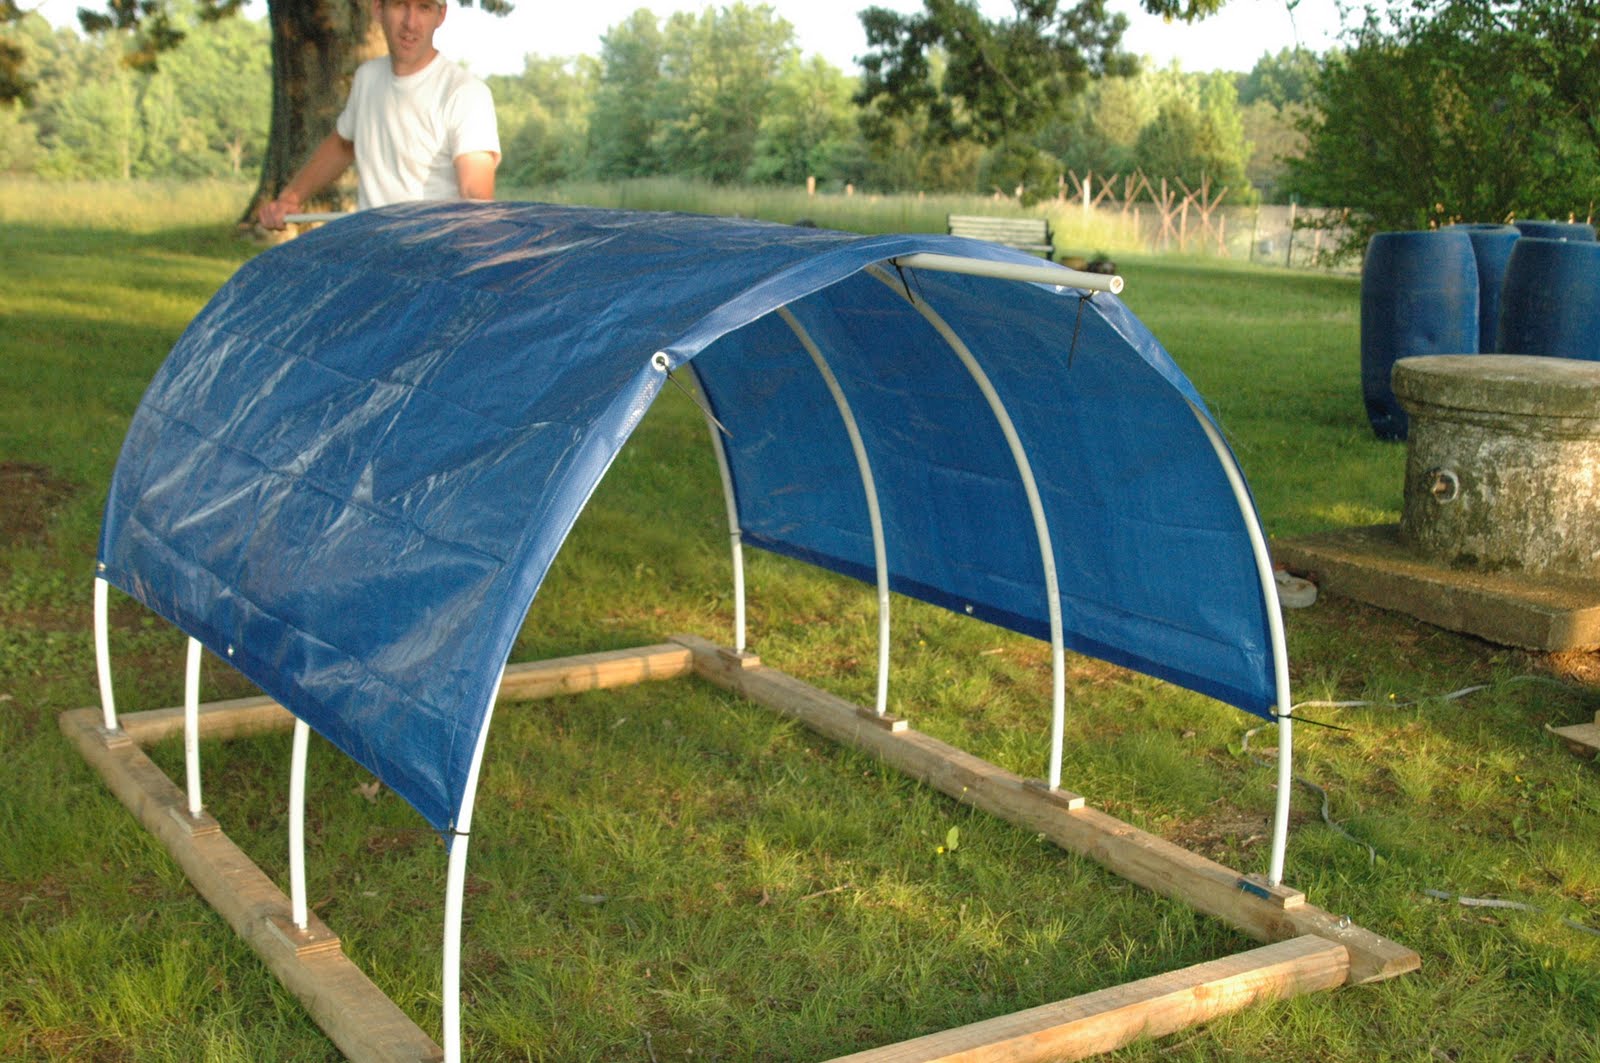 DIY Carport Canopy Learn How to Build a Carport Tent in